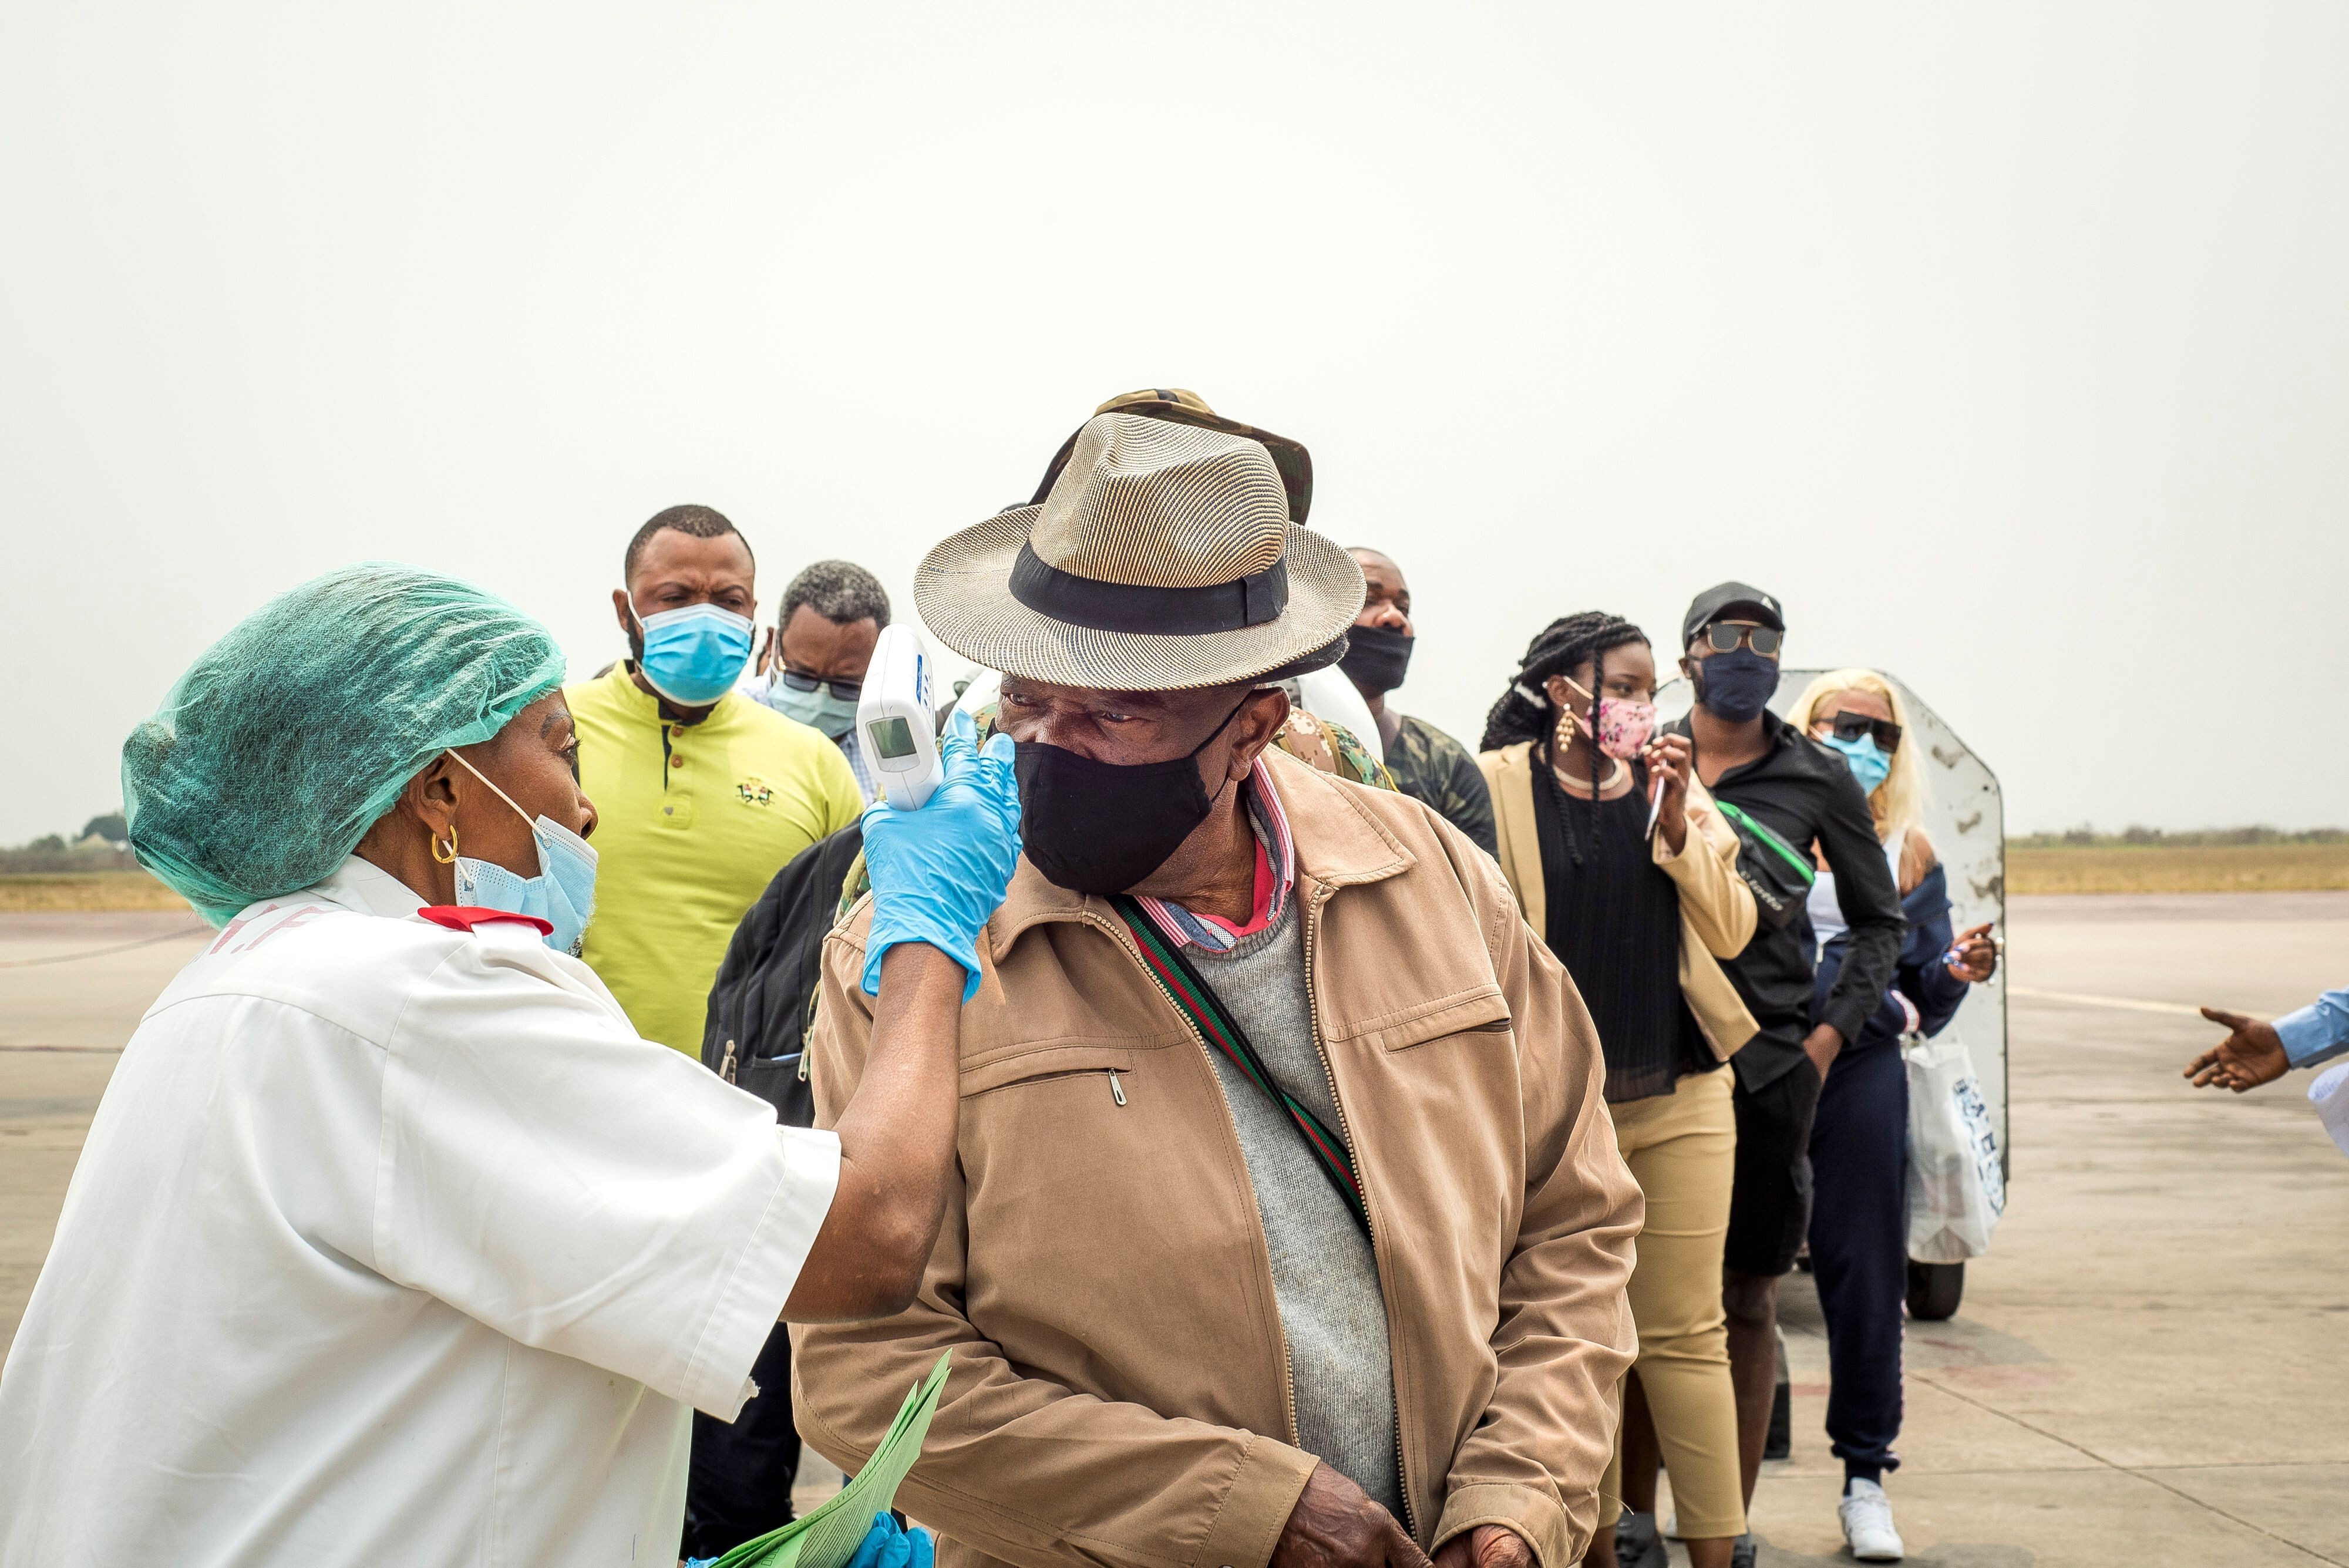 An airport worker takes the temperature of a passenger arriving at N'djili International Airport in Kinshasa on August 15. Congo’s multiple battles with Ebola have helped to prepare it for the fight against Covid-19. Photo: AFP